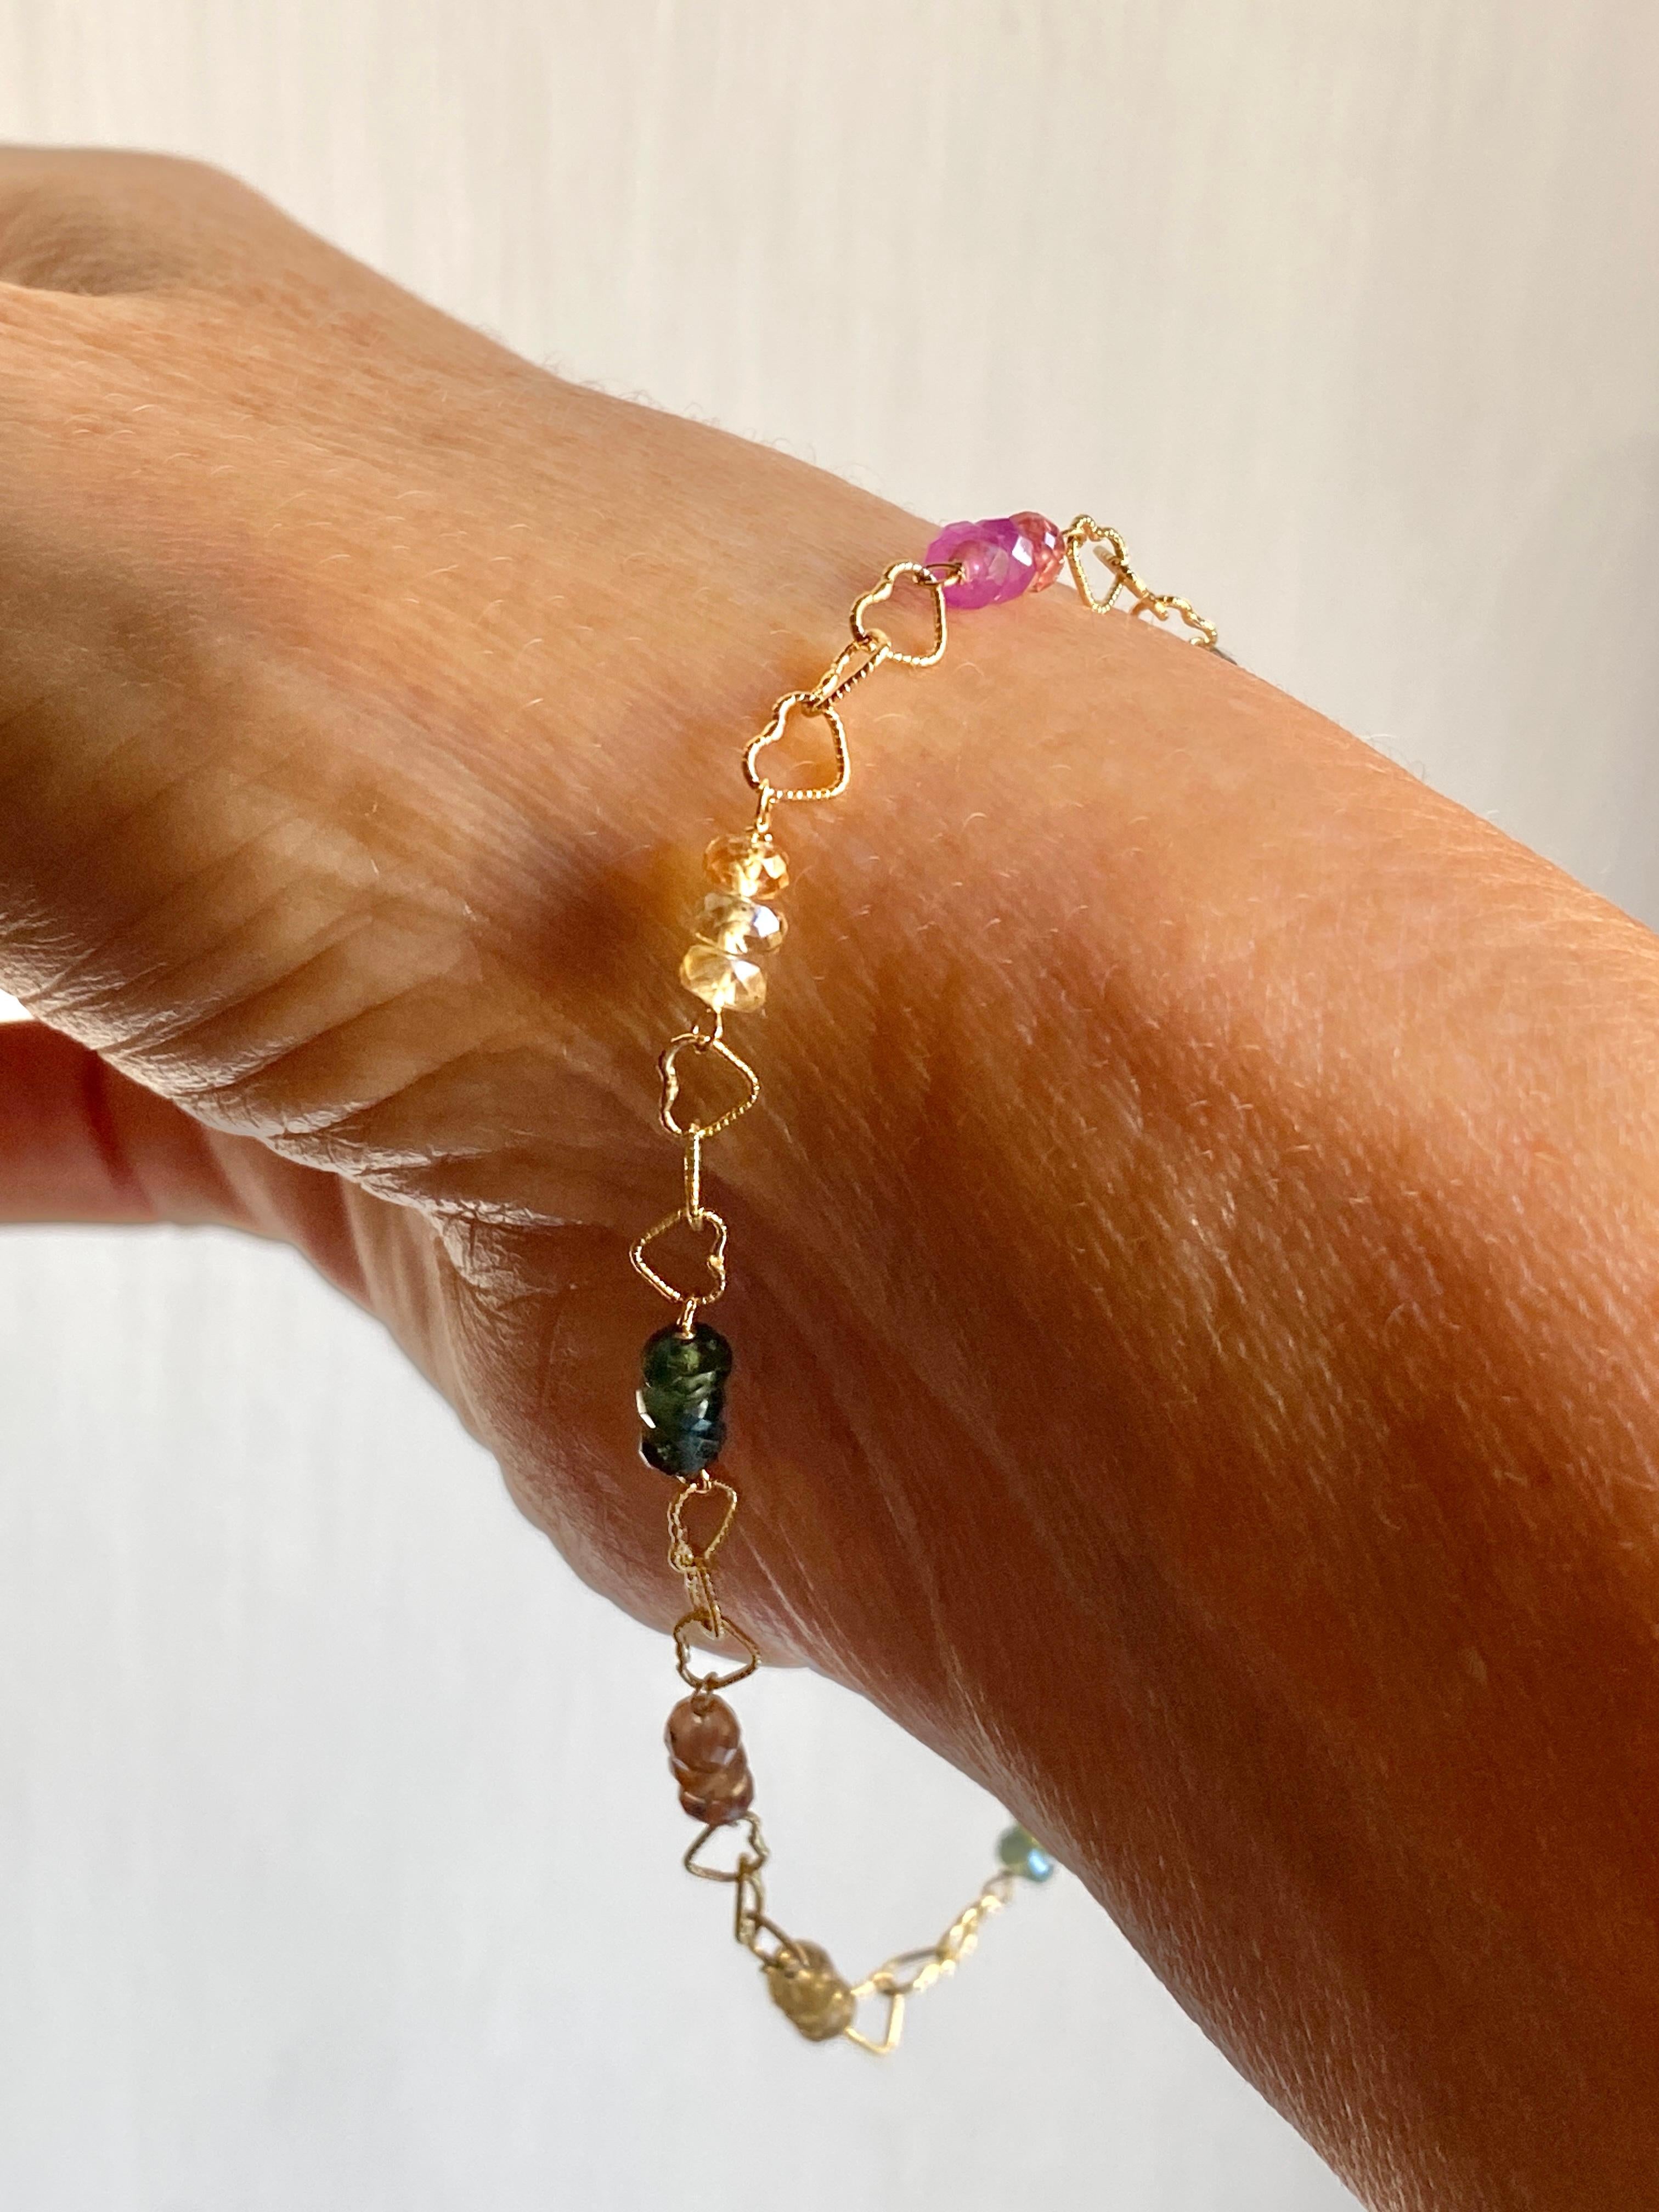 Handcrafted 18K Gold Multicolor Sapphire Chain Bracelet Handcrafted in Italy For Sale 1